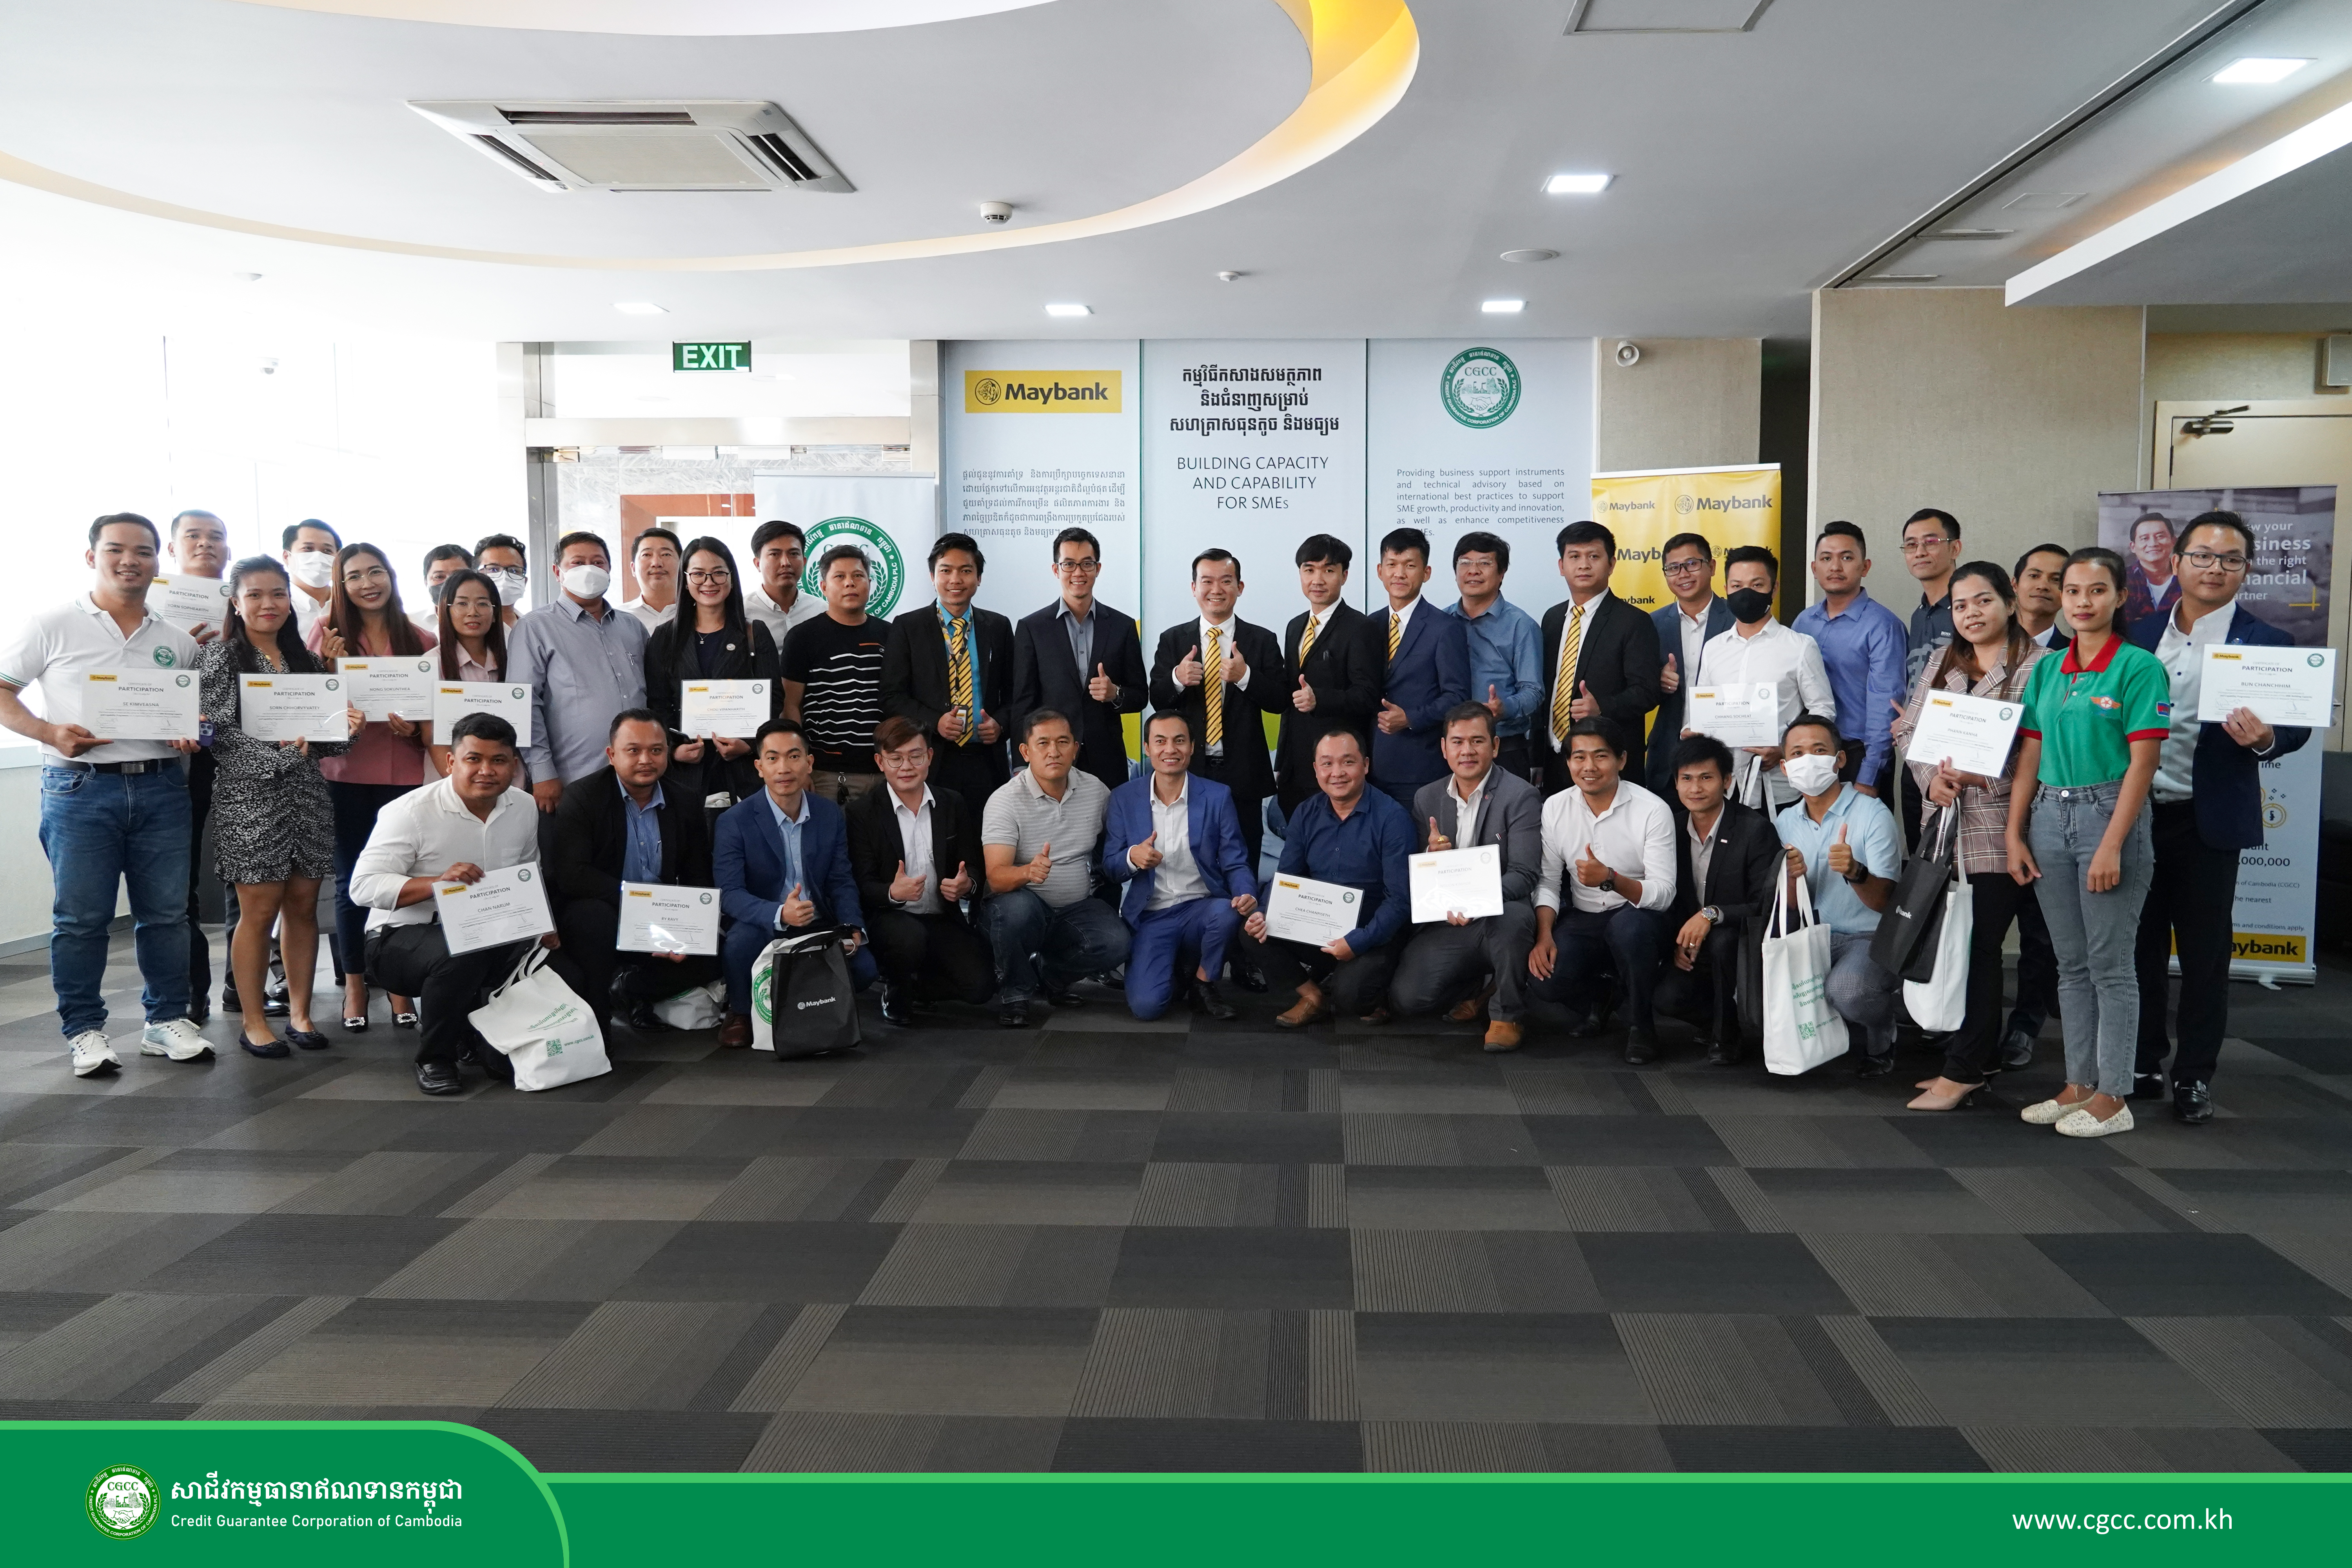 CGCC and Maybank Co-organized the “SME Building Capacity and Capability (BCC) Programme”